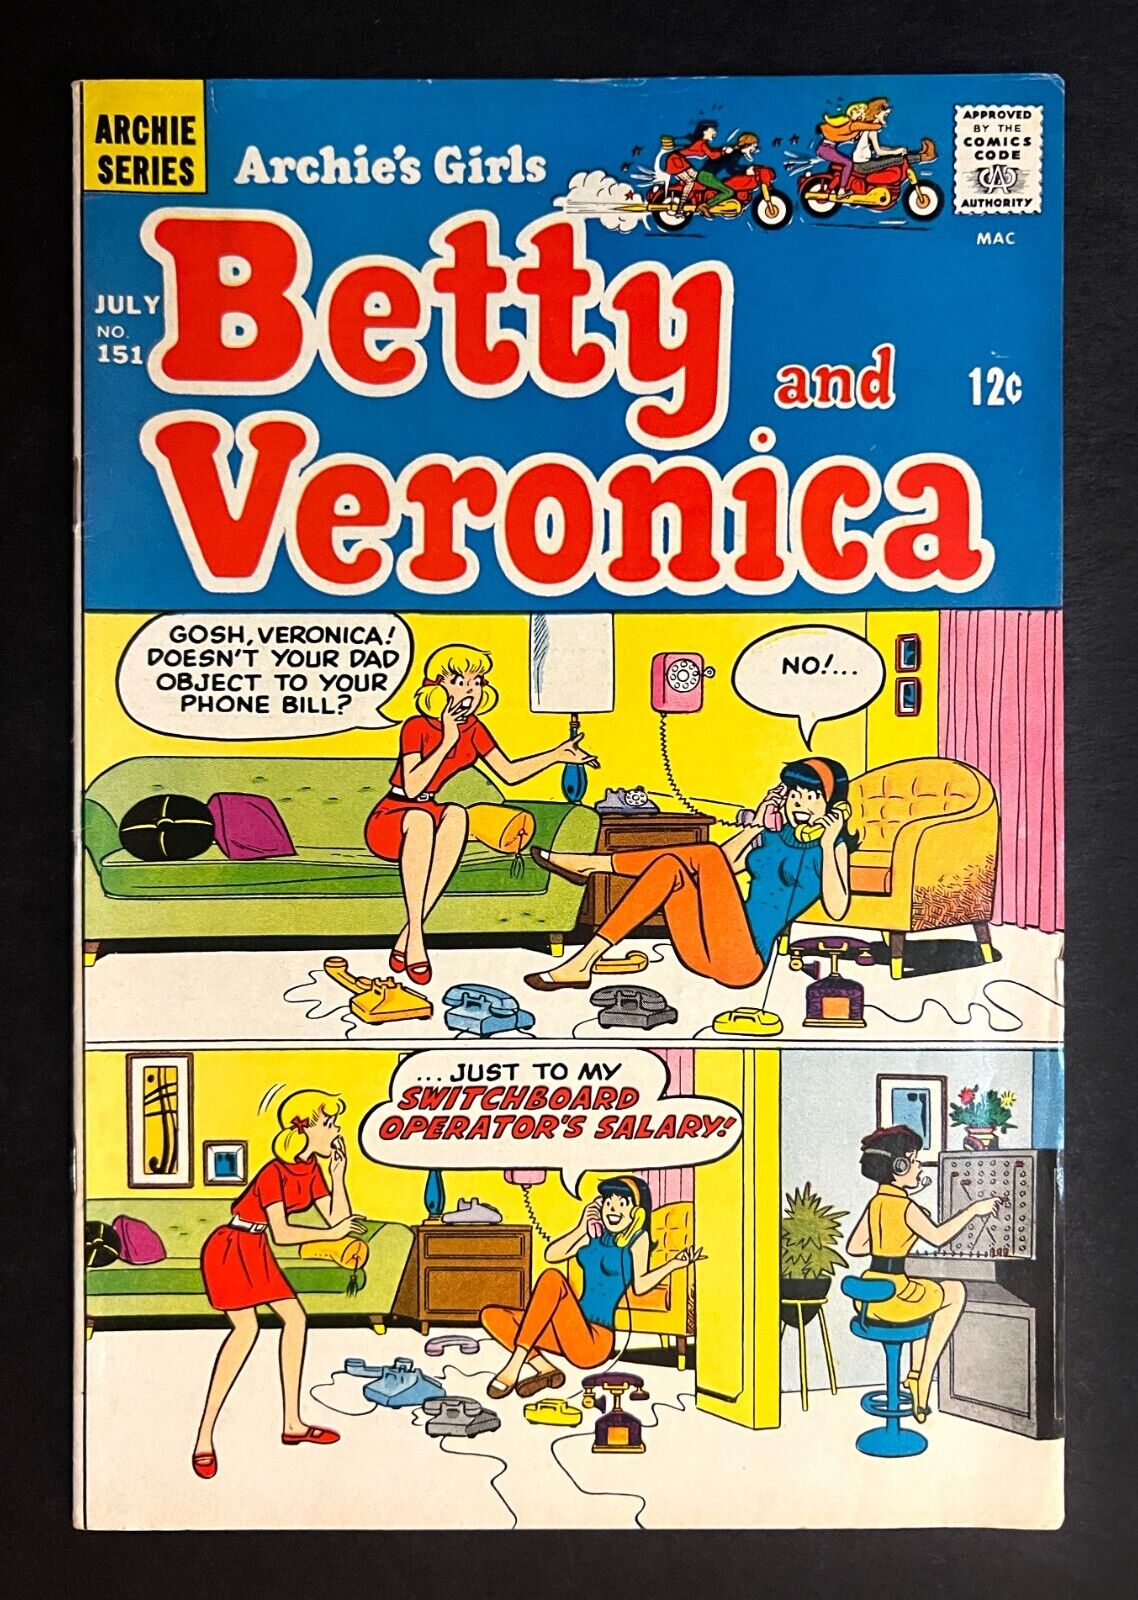 BETTY AND VERONICA #151 Nice Condition Archie Comics 1968